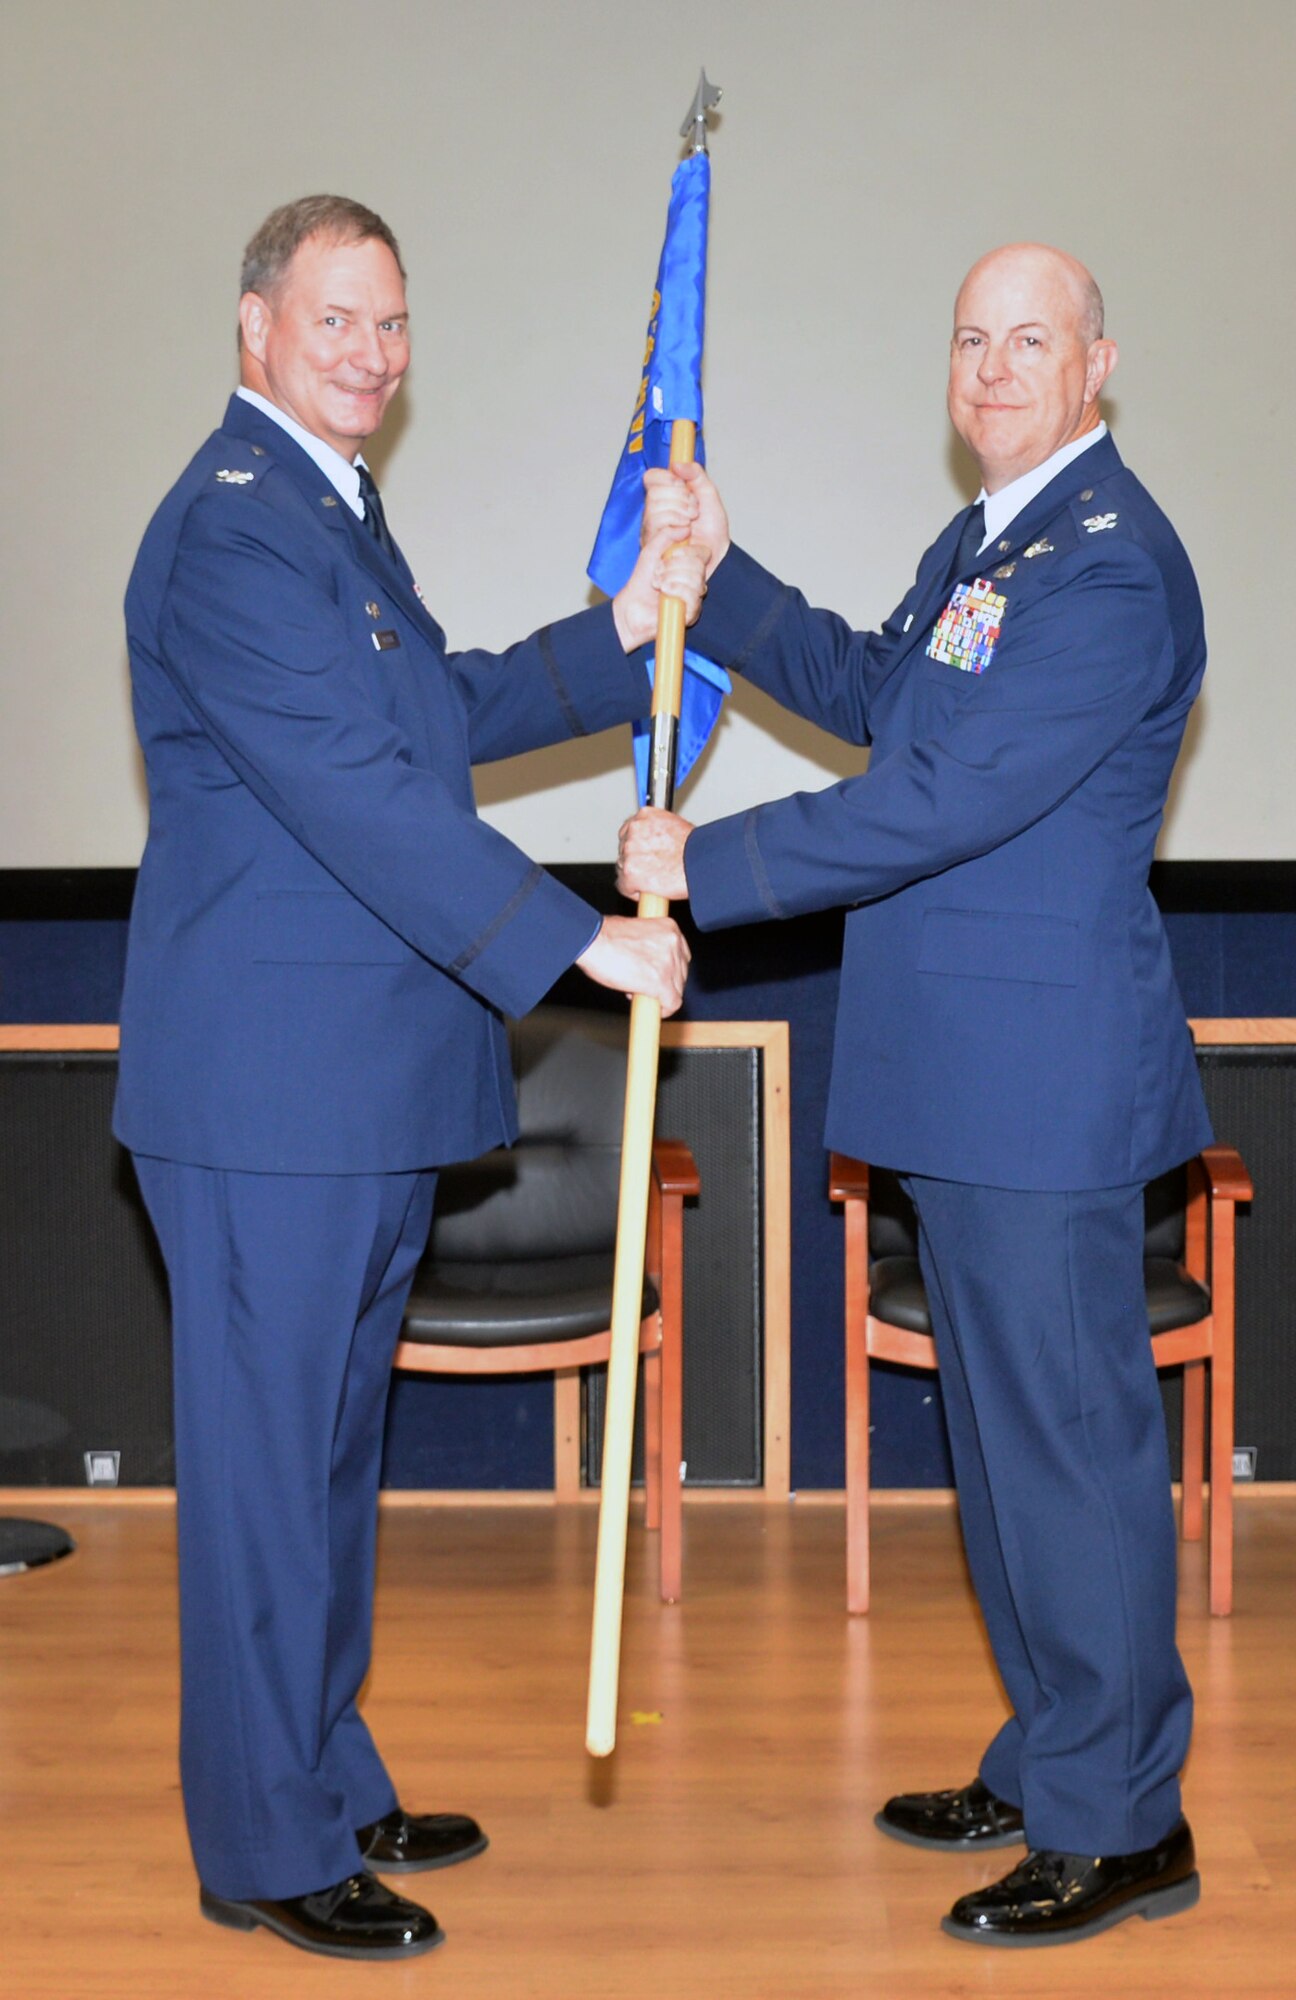 Col. Terry W. McClain, 433rd Airlift Wing commander, presents the 433rd Operations Group guidon to Col. James C. “JC” Miller signifying his assumption of command at a ceremony Aug. 3, 2019 at Joint Base San Antonio-Lackland, Texas.